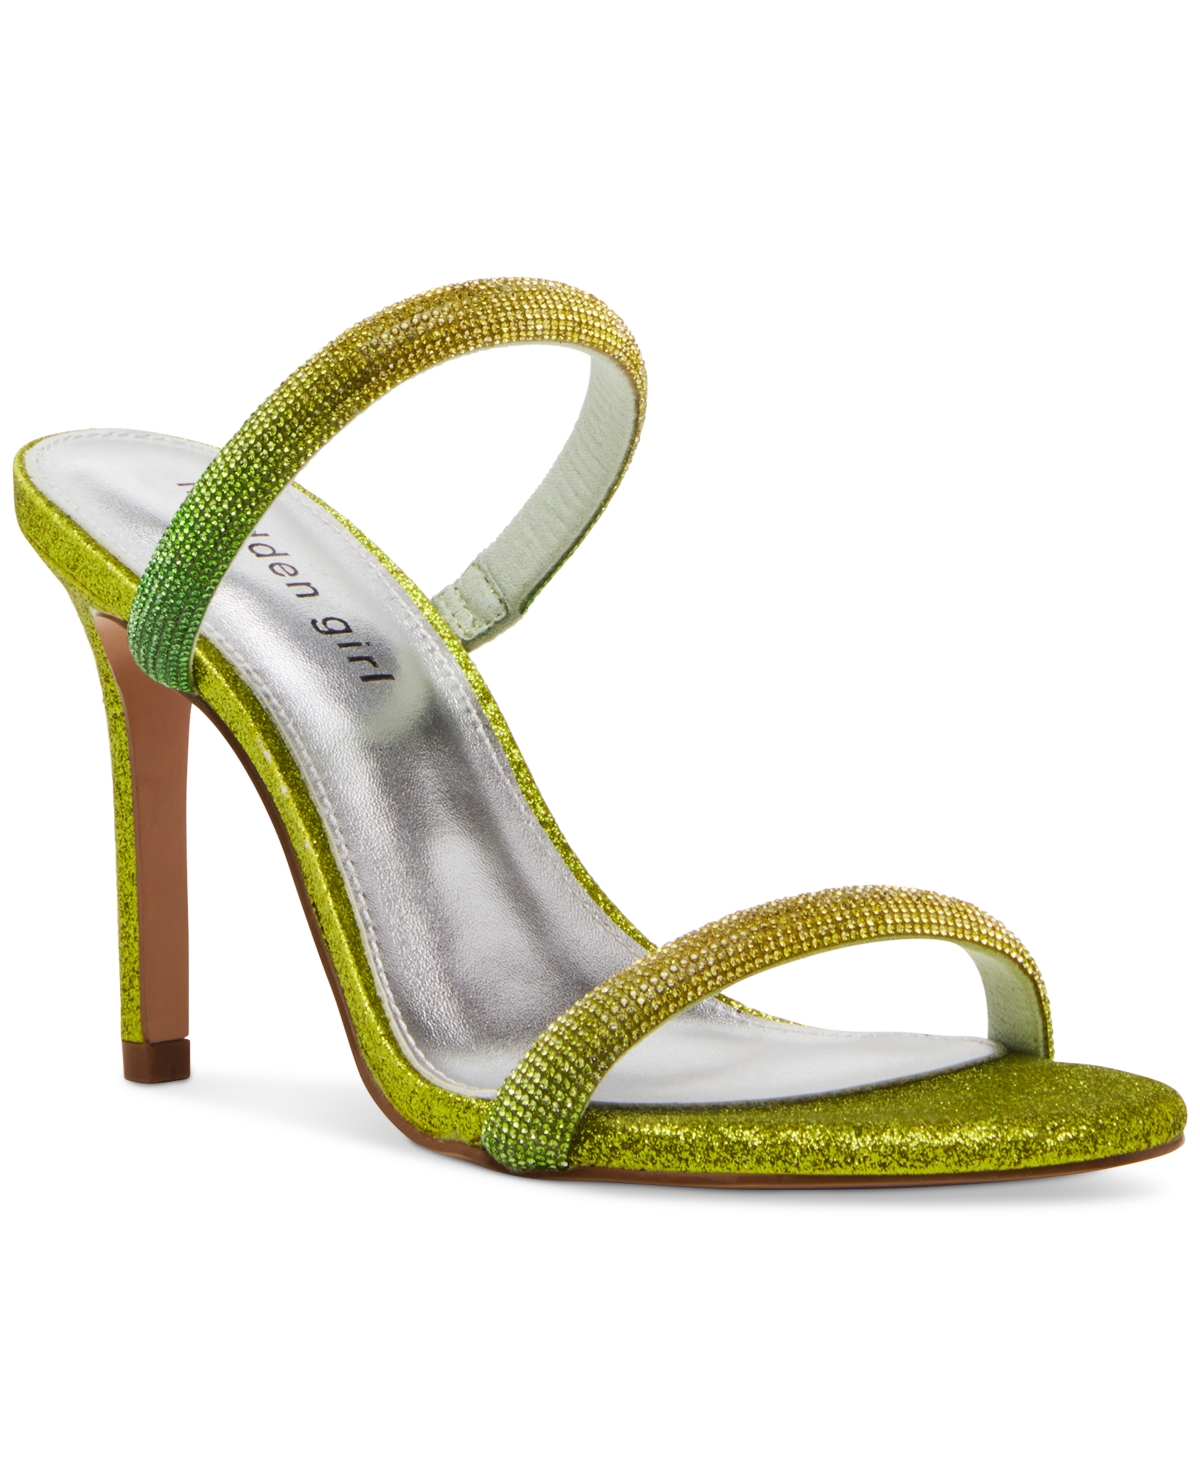 Madden Girl Beauty-r Two Band Stiletto Dress Sandals In Citron Multi